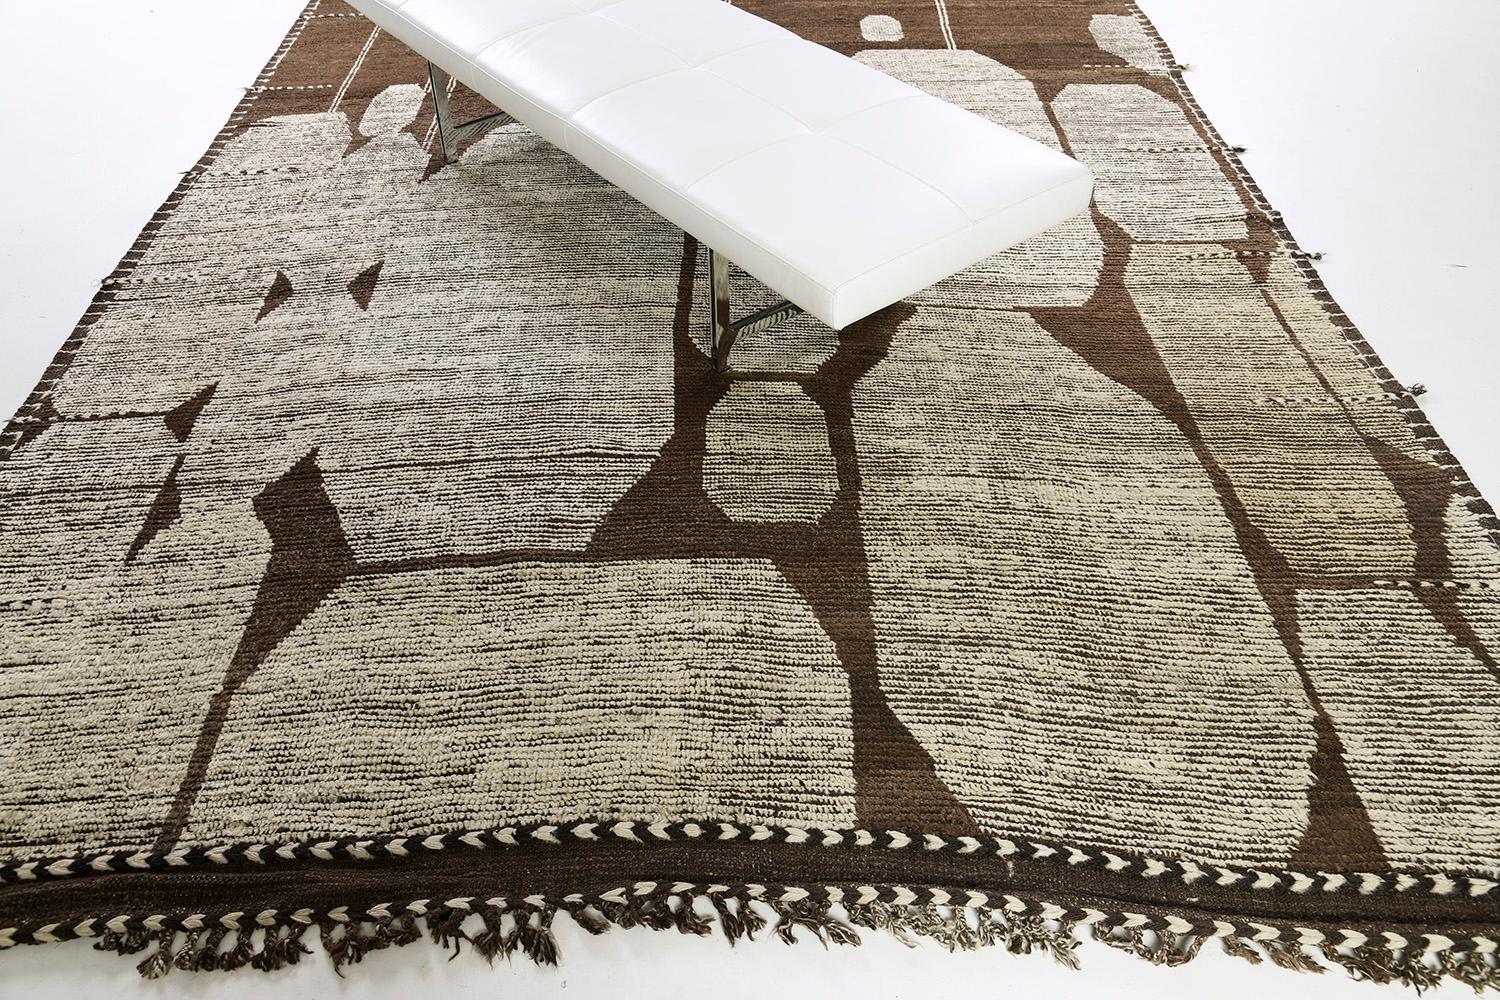 Amapola is made of a beautiful wool pile weave in natural colors of brown and gold with irregular patched design elements. Its weaving of irregular shapes and patterns are what makes the Atlas collection so unique and sought after. Mehraban's Atlas